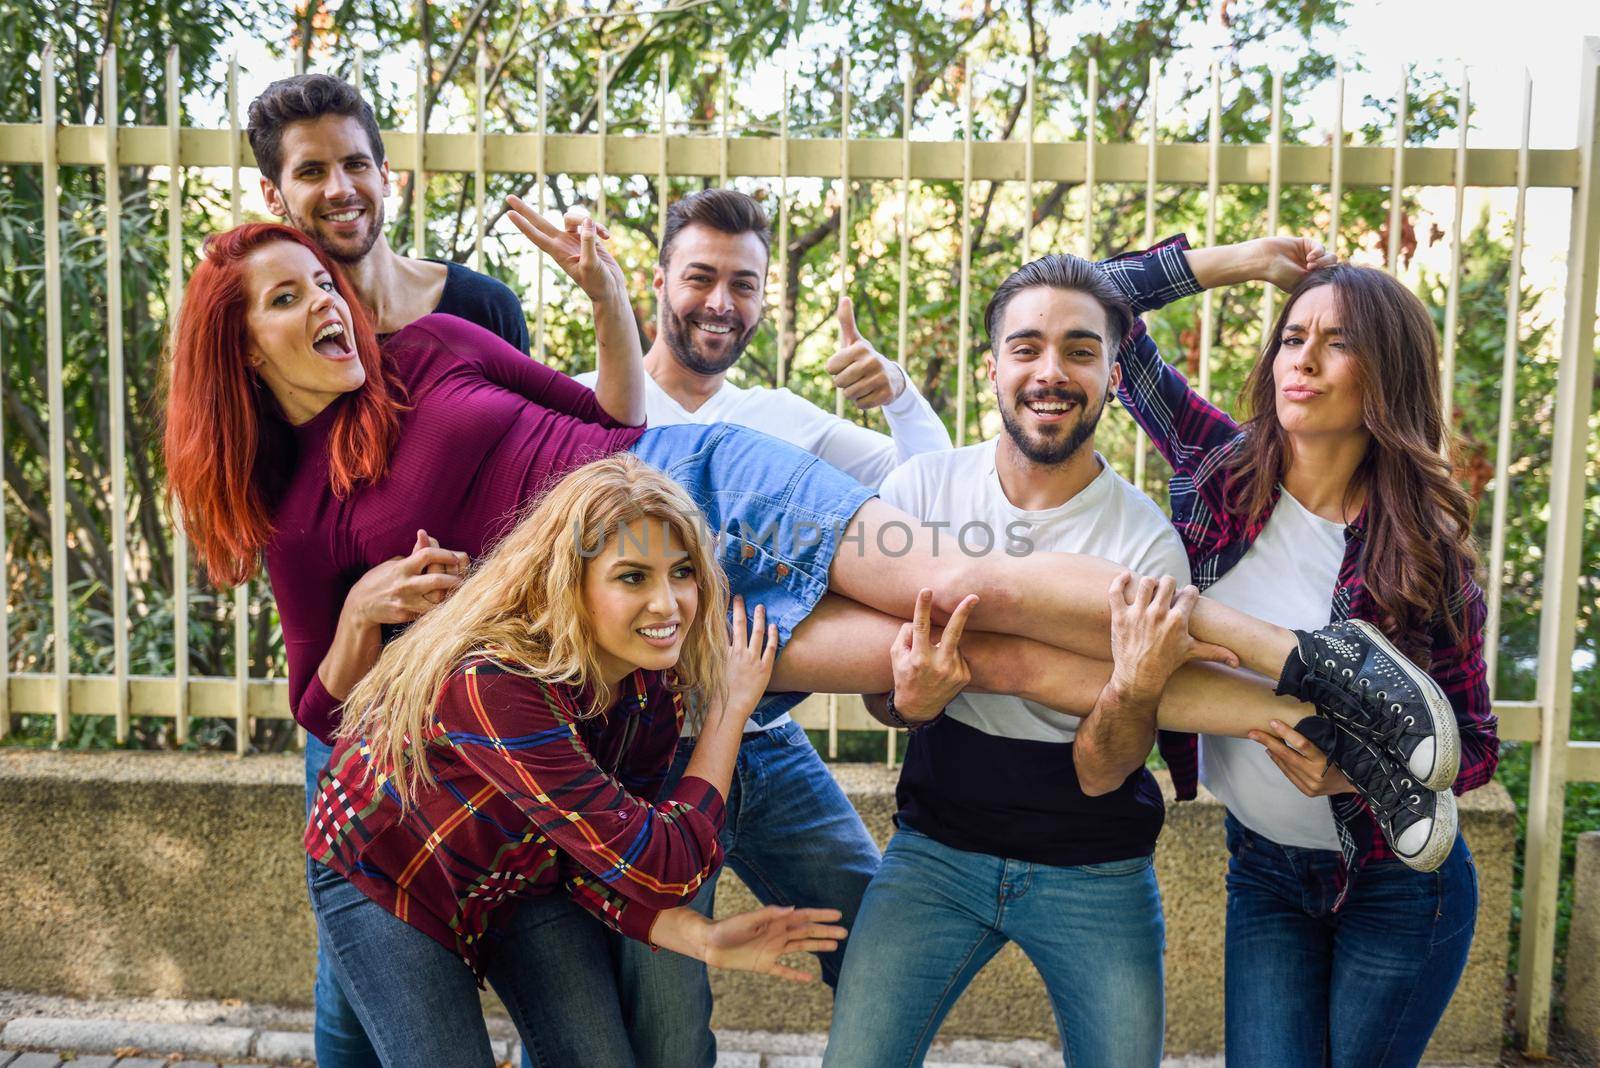 Group portrait of boys and girls with colorful fashionable clothes holding friend. Urban style people having fun - Concepts about youth and togetherness.